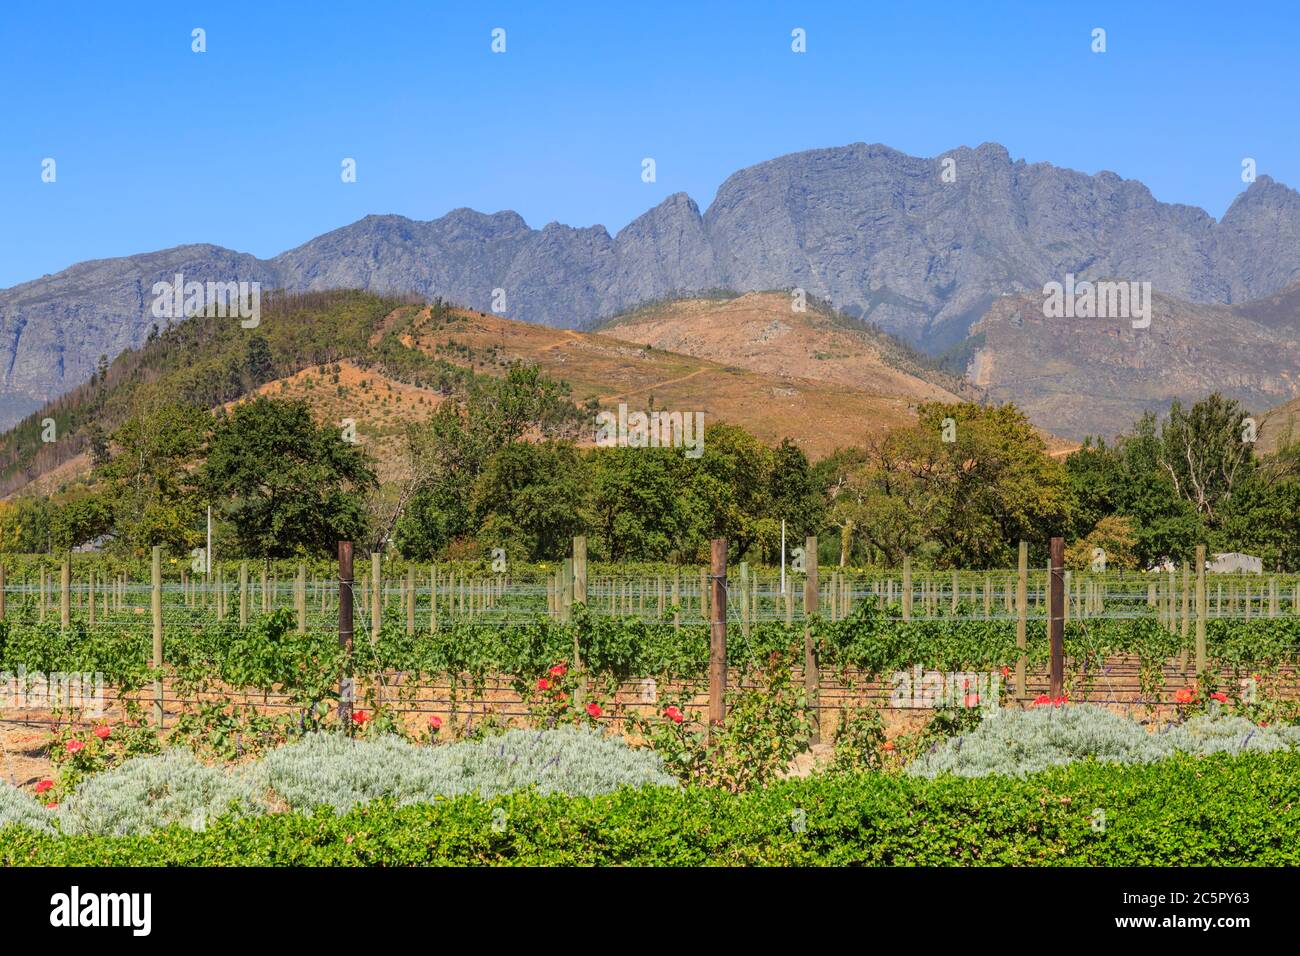 A vineyard in Franschhoek with mountains behind Stock Photo